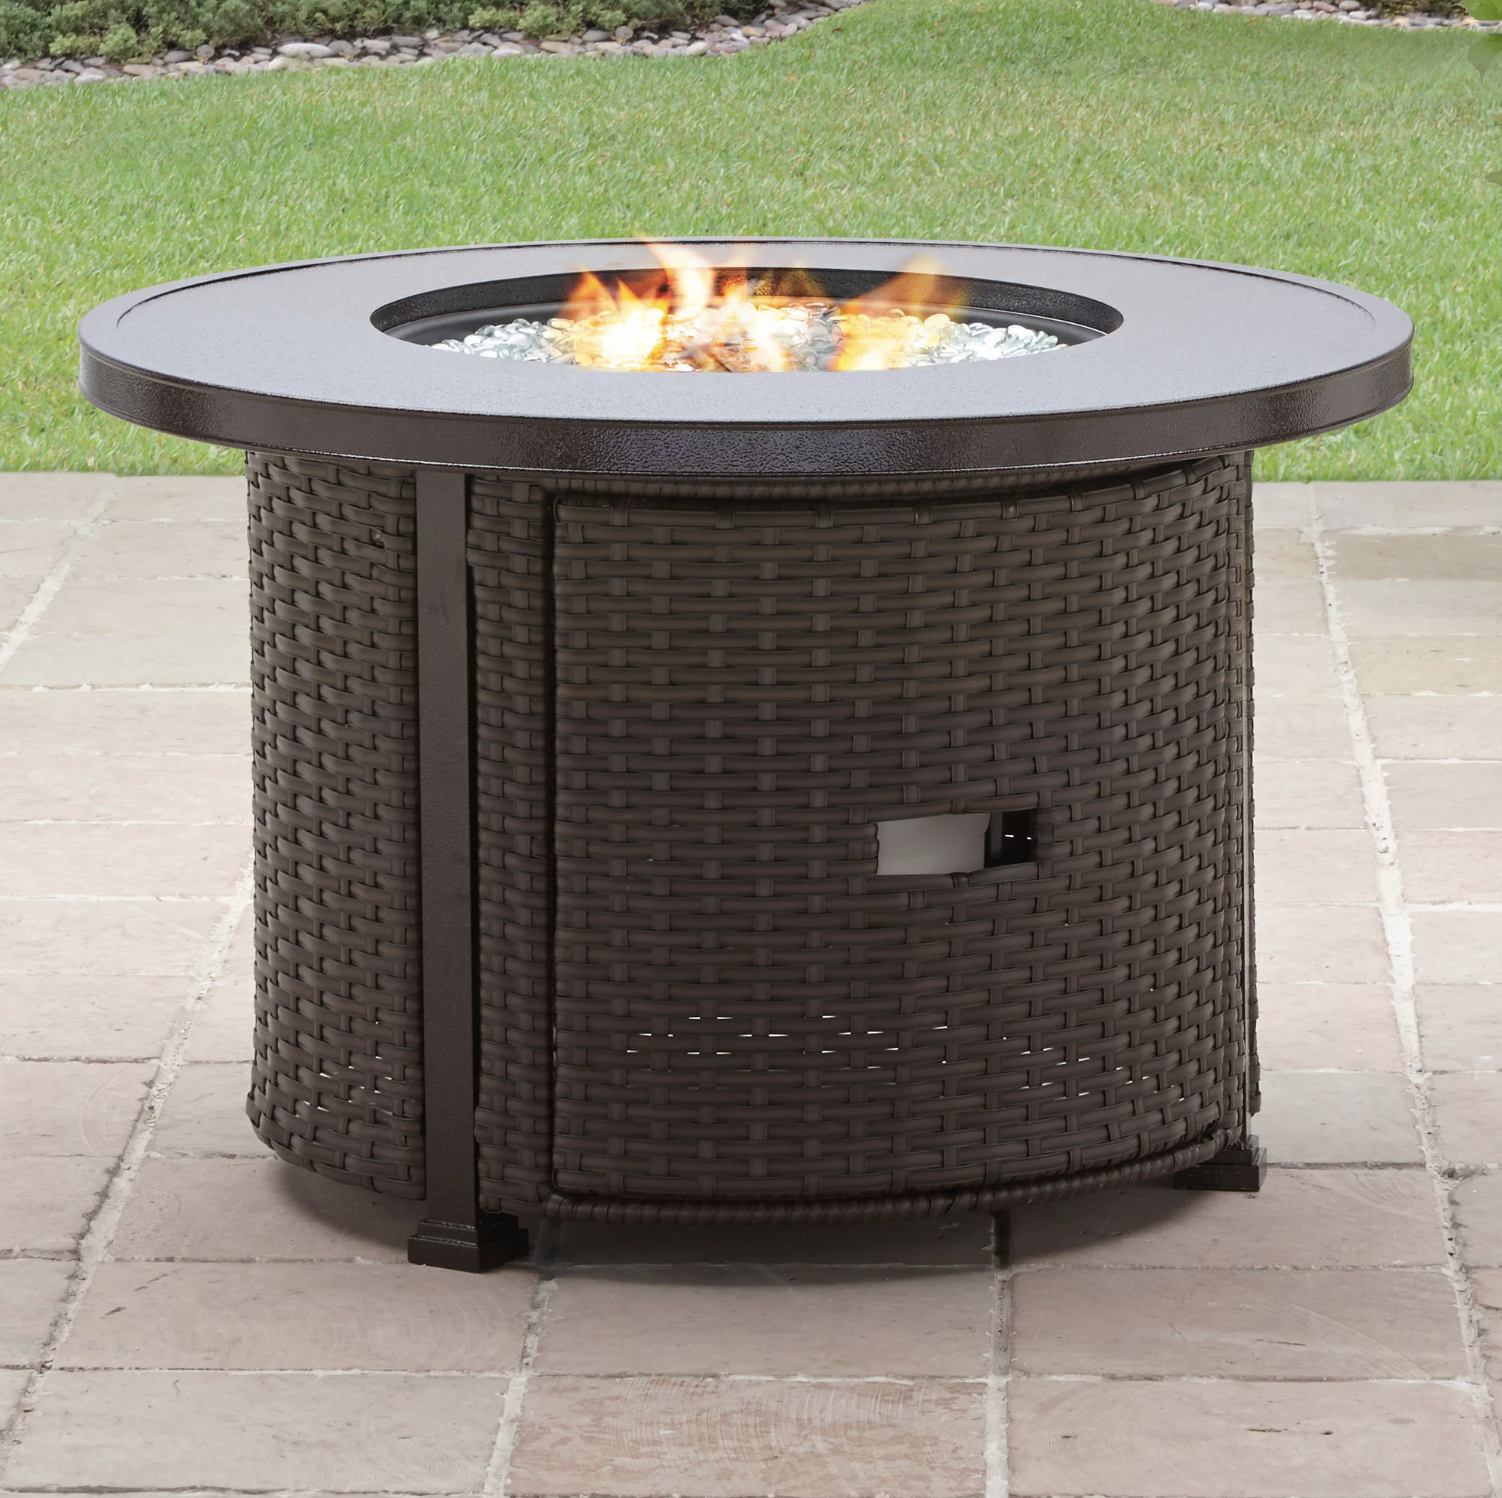 the fire pit on a patio with the top lit